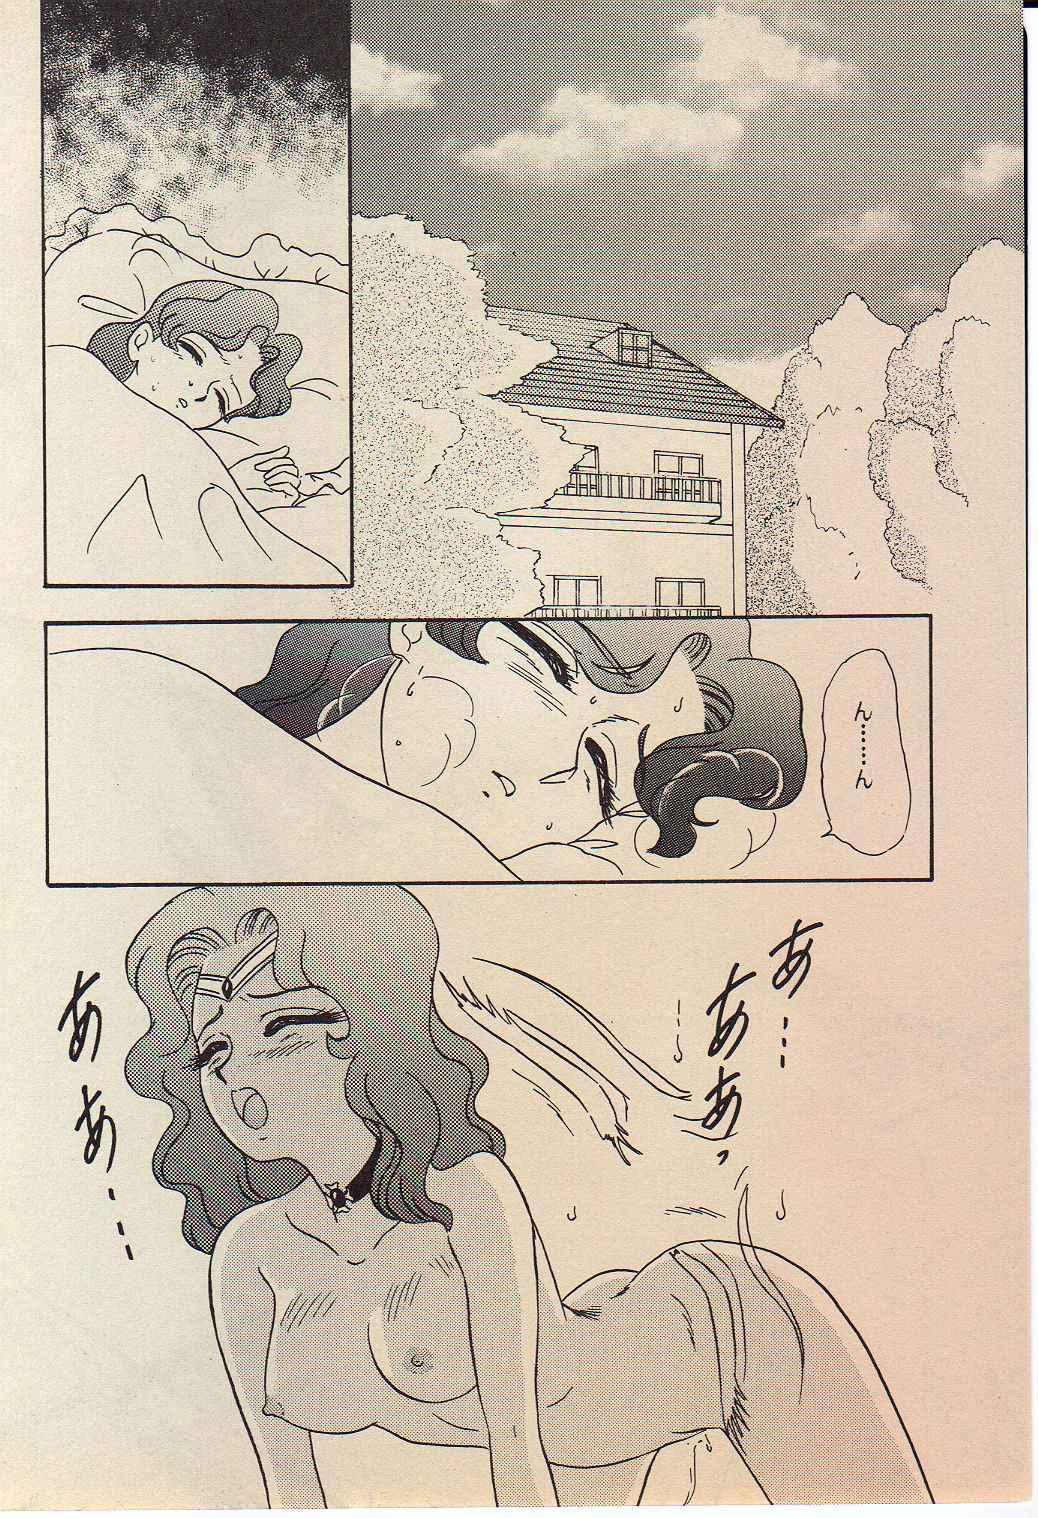 Pussy Fingering Lunch Box 11 - Twinkle Twinkle - Sailor moon Putinha - Page 5